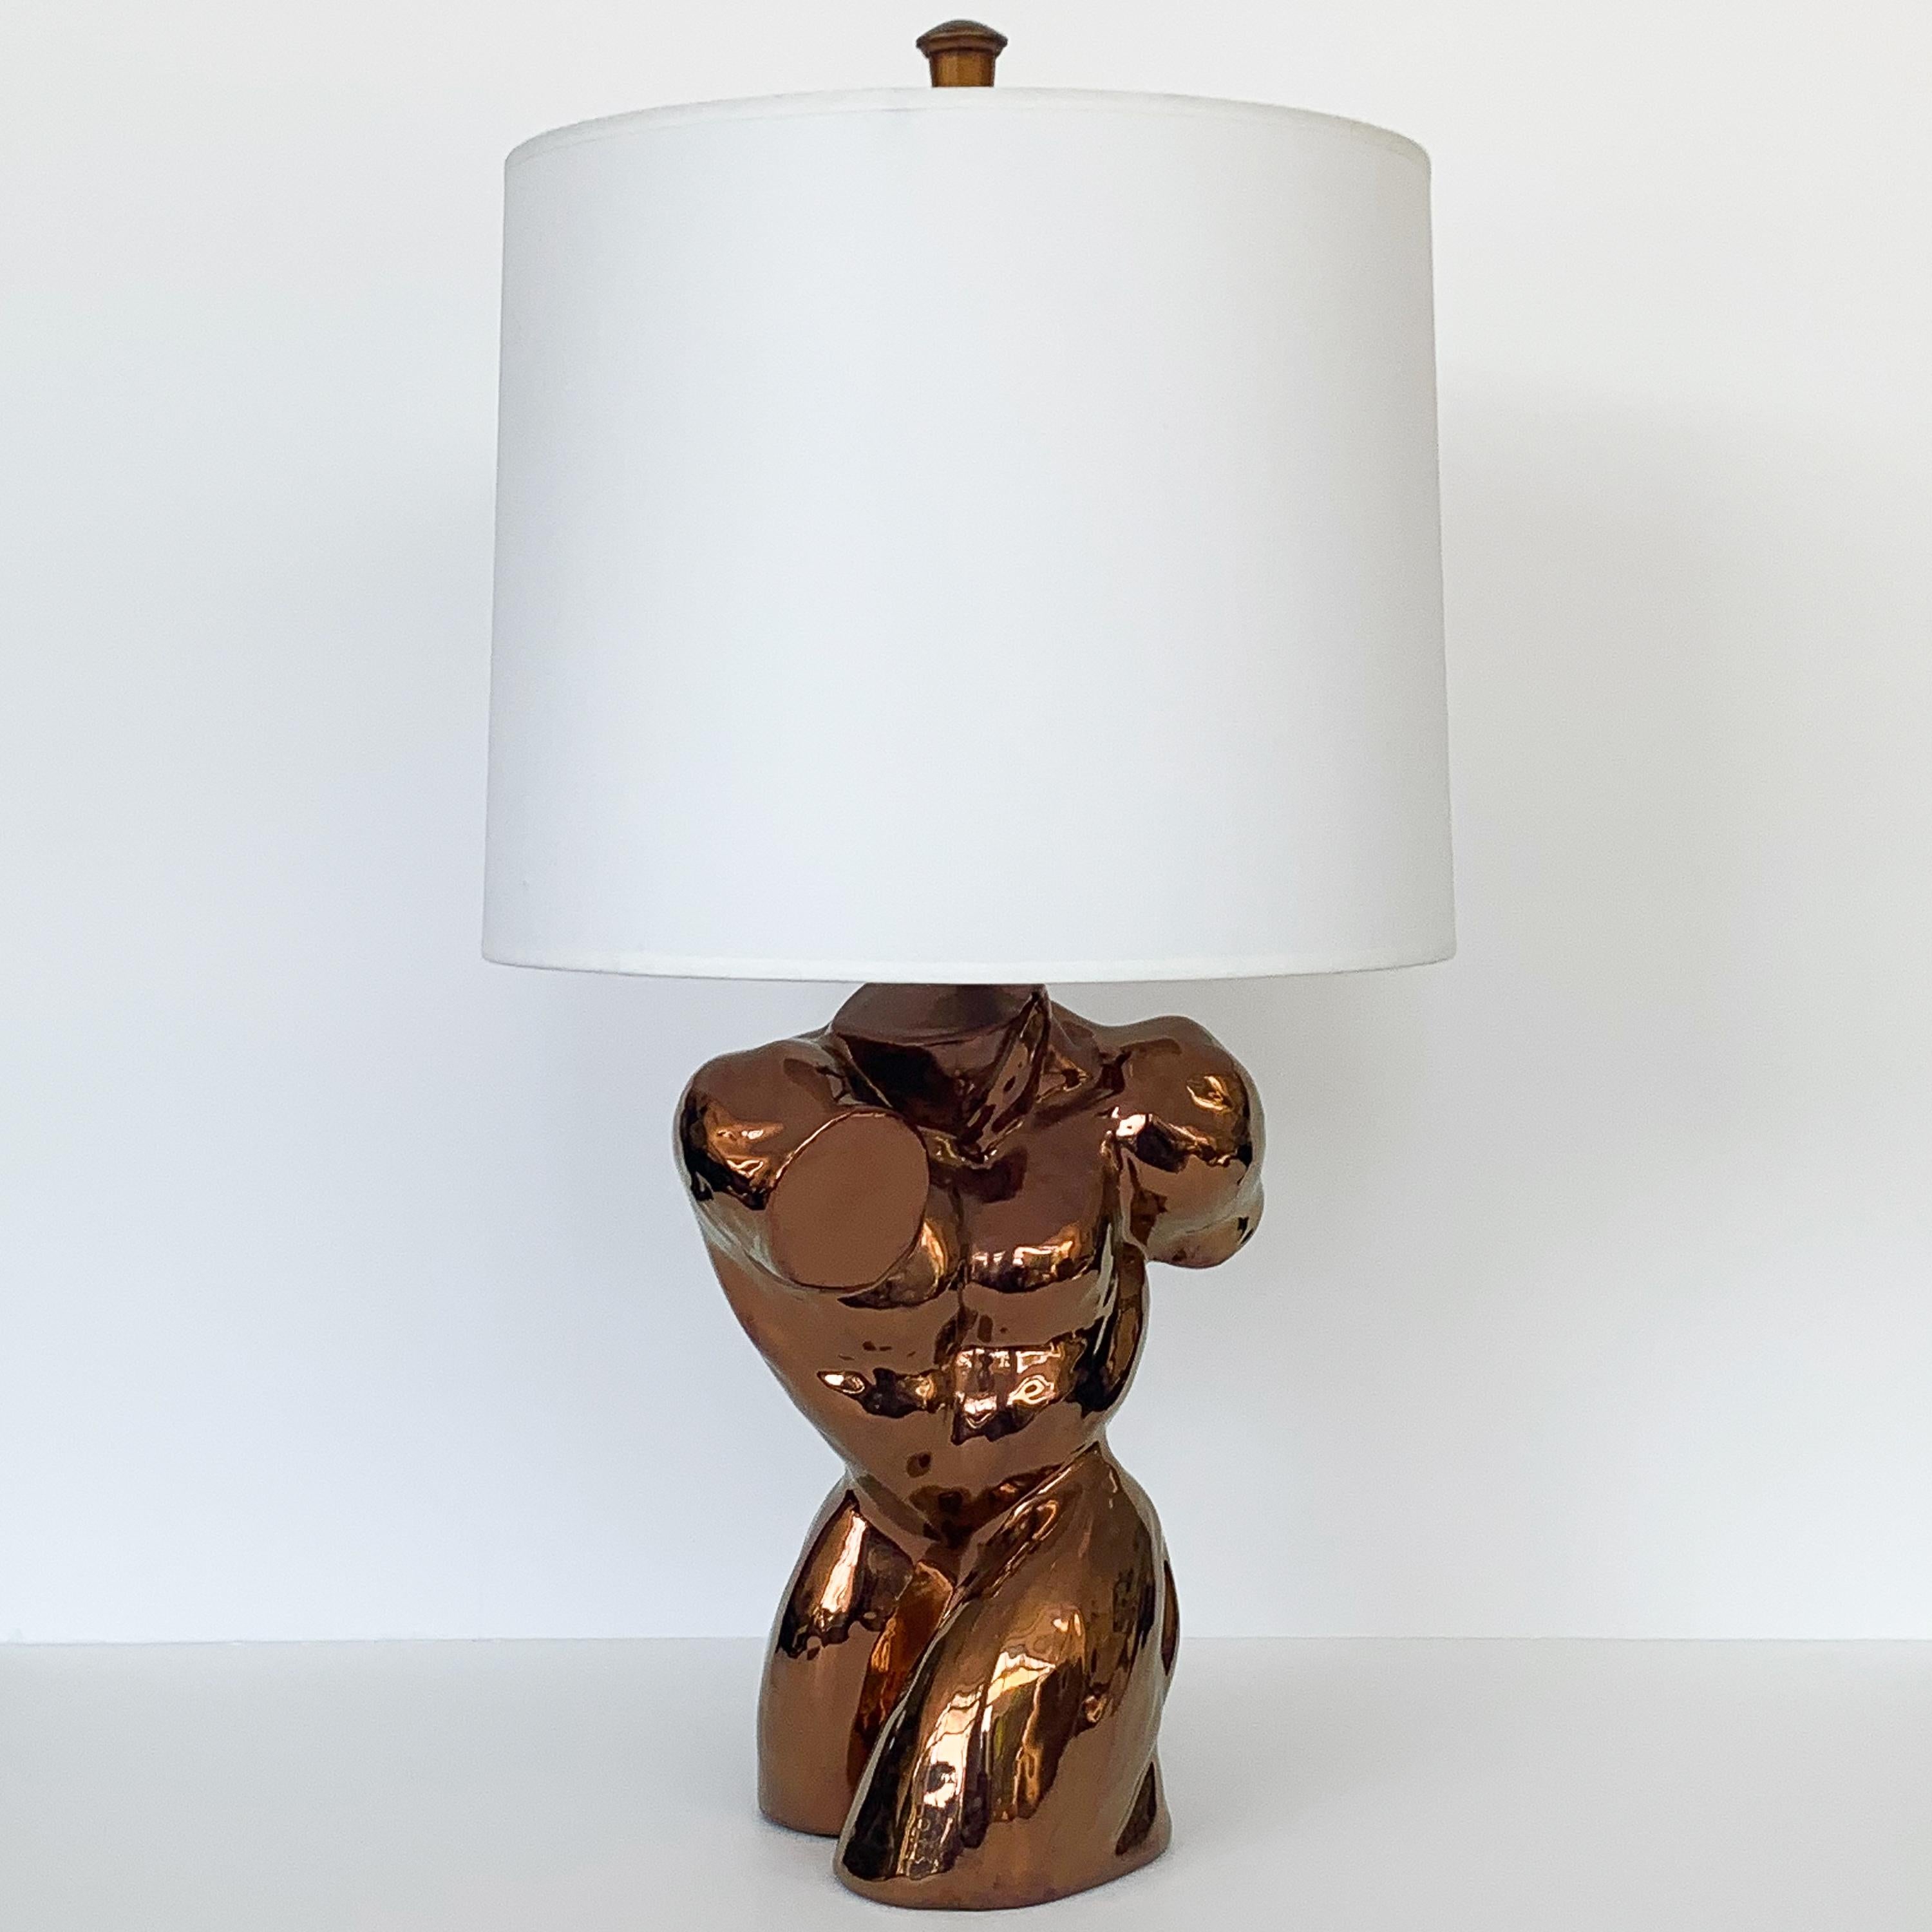 Nude male torso table lamp in metallic copper glaze over ceramic, circa 1970s. Incredible and striking sculptural lamp! Takes one standard base light bulb. Base 14